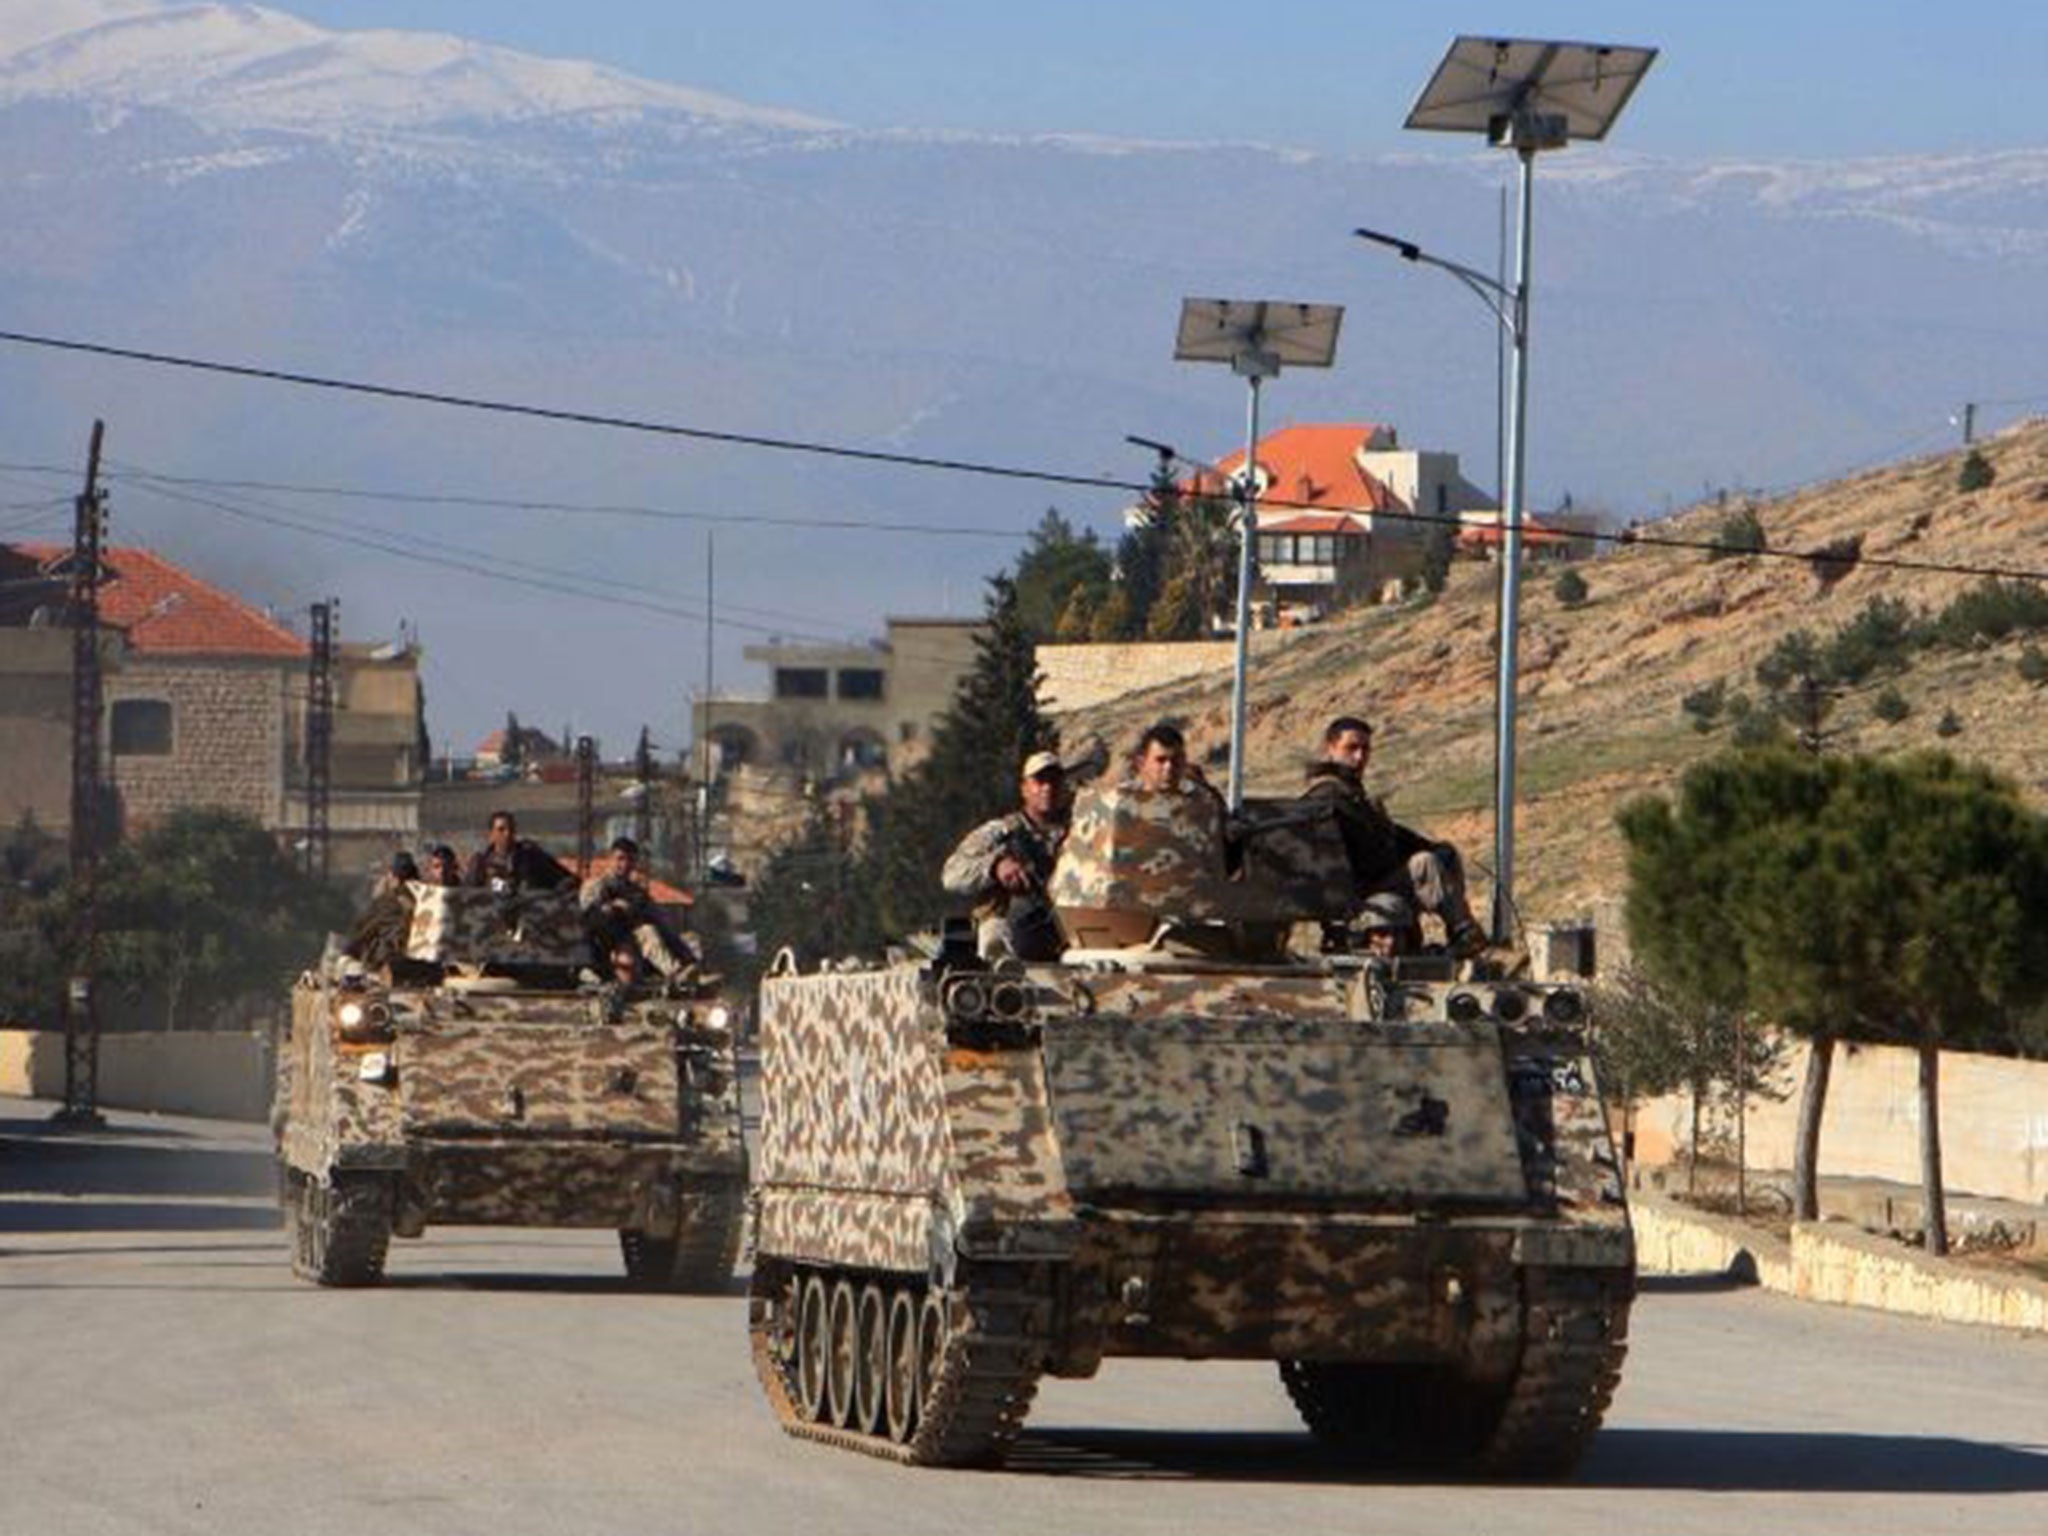 Lebanese army troops drive armoured personnel carriers (APC) in the village of Ras Baalbak on 23 January